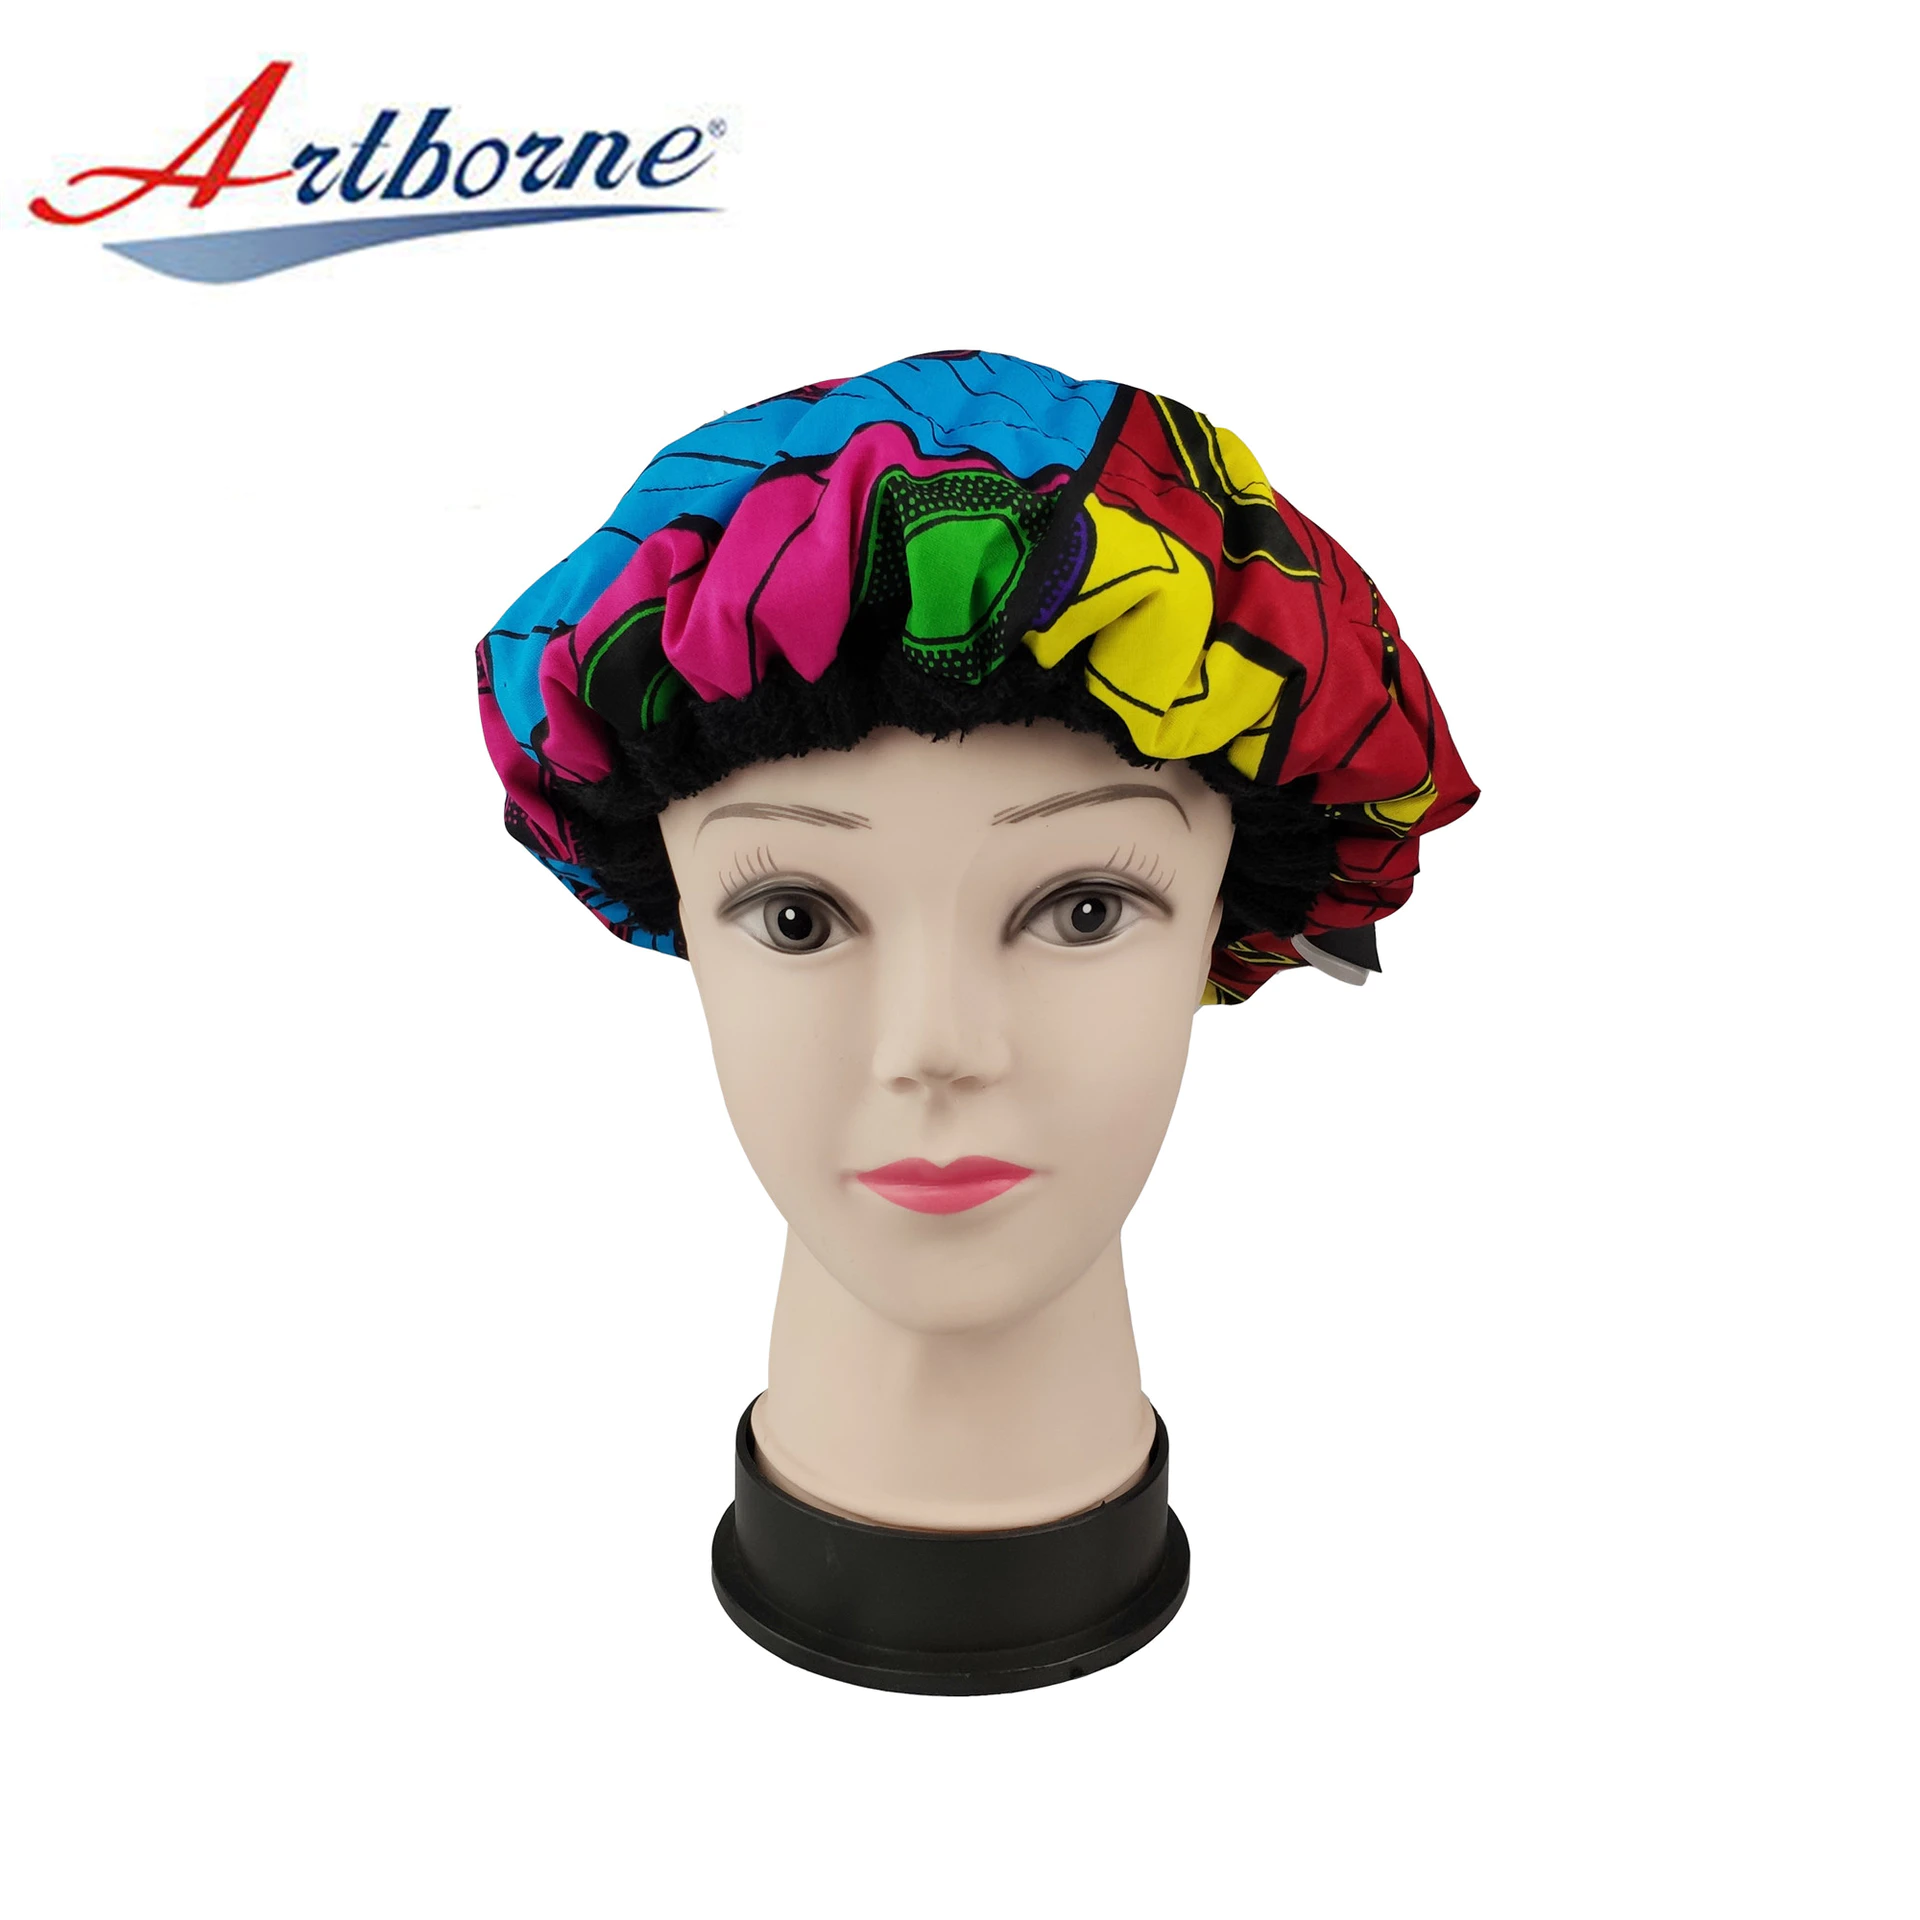 Artborne care best shower cap for deep conditioning factory for lady-33